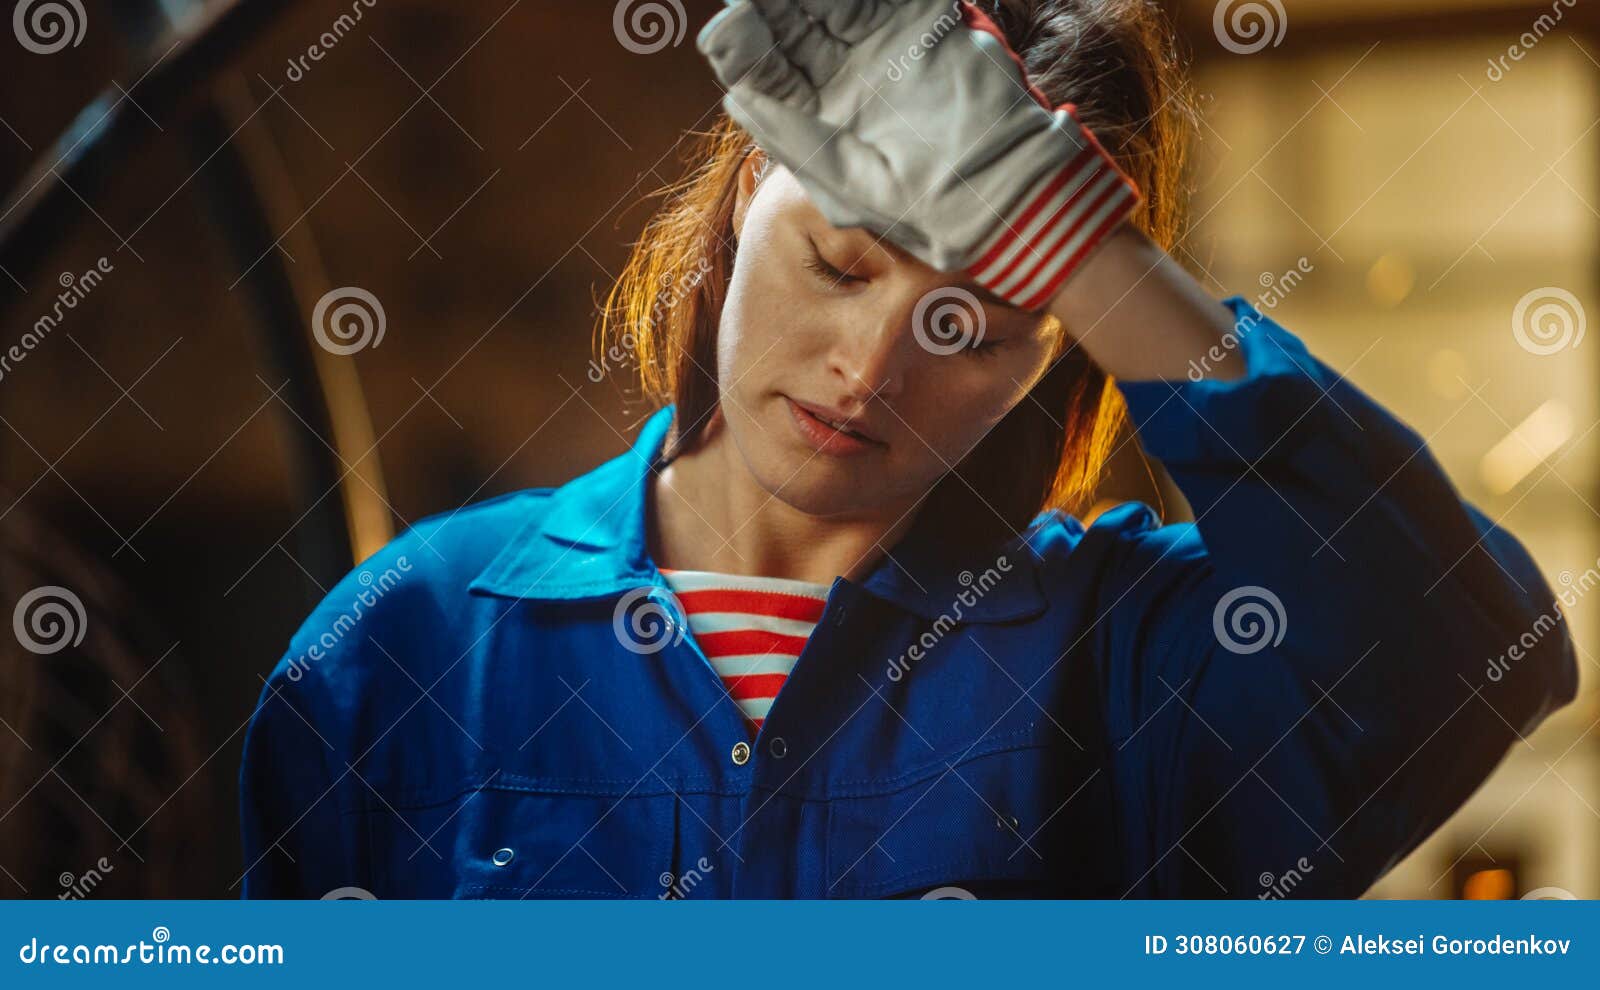 young beautiful empowering woman rubs her forehead. authentic fabricator wearing work clothes in a